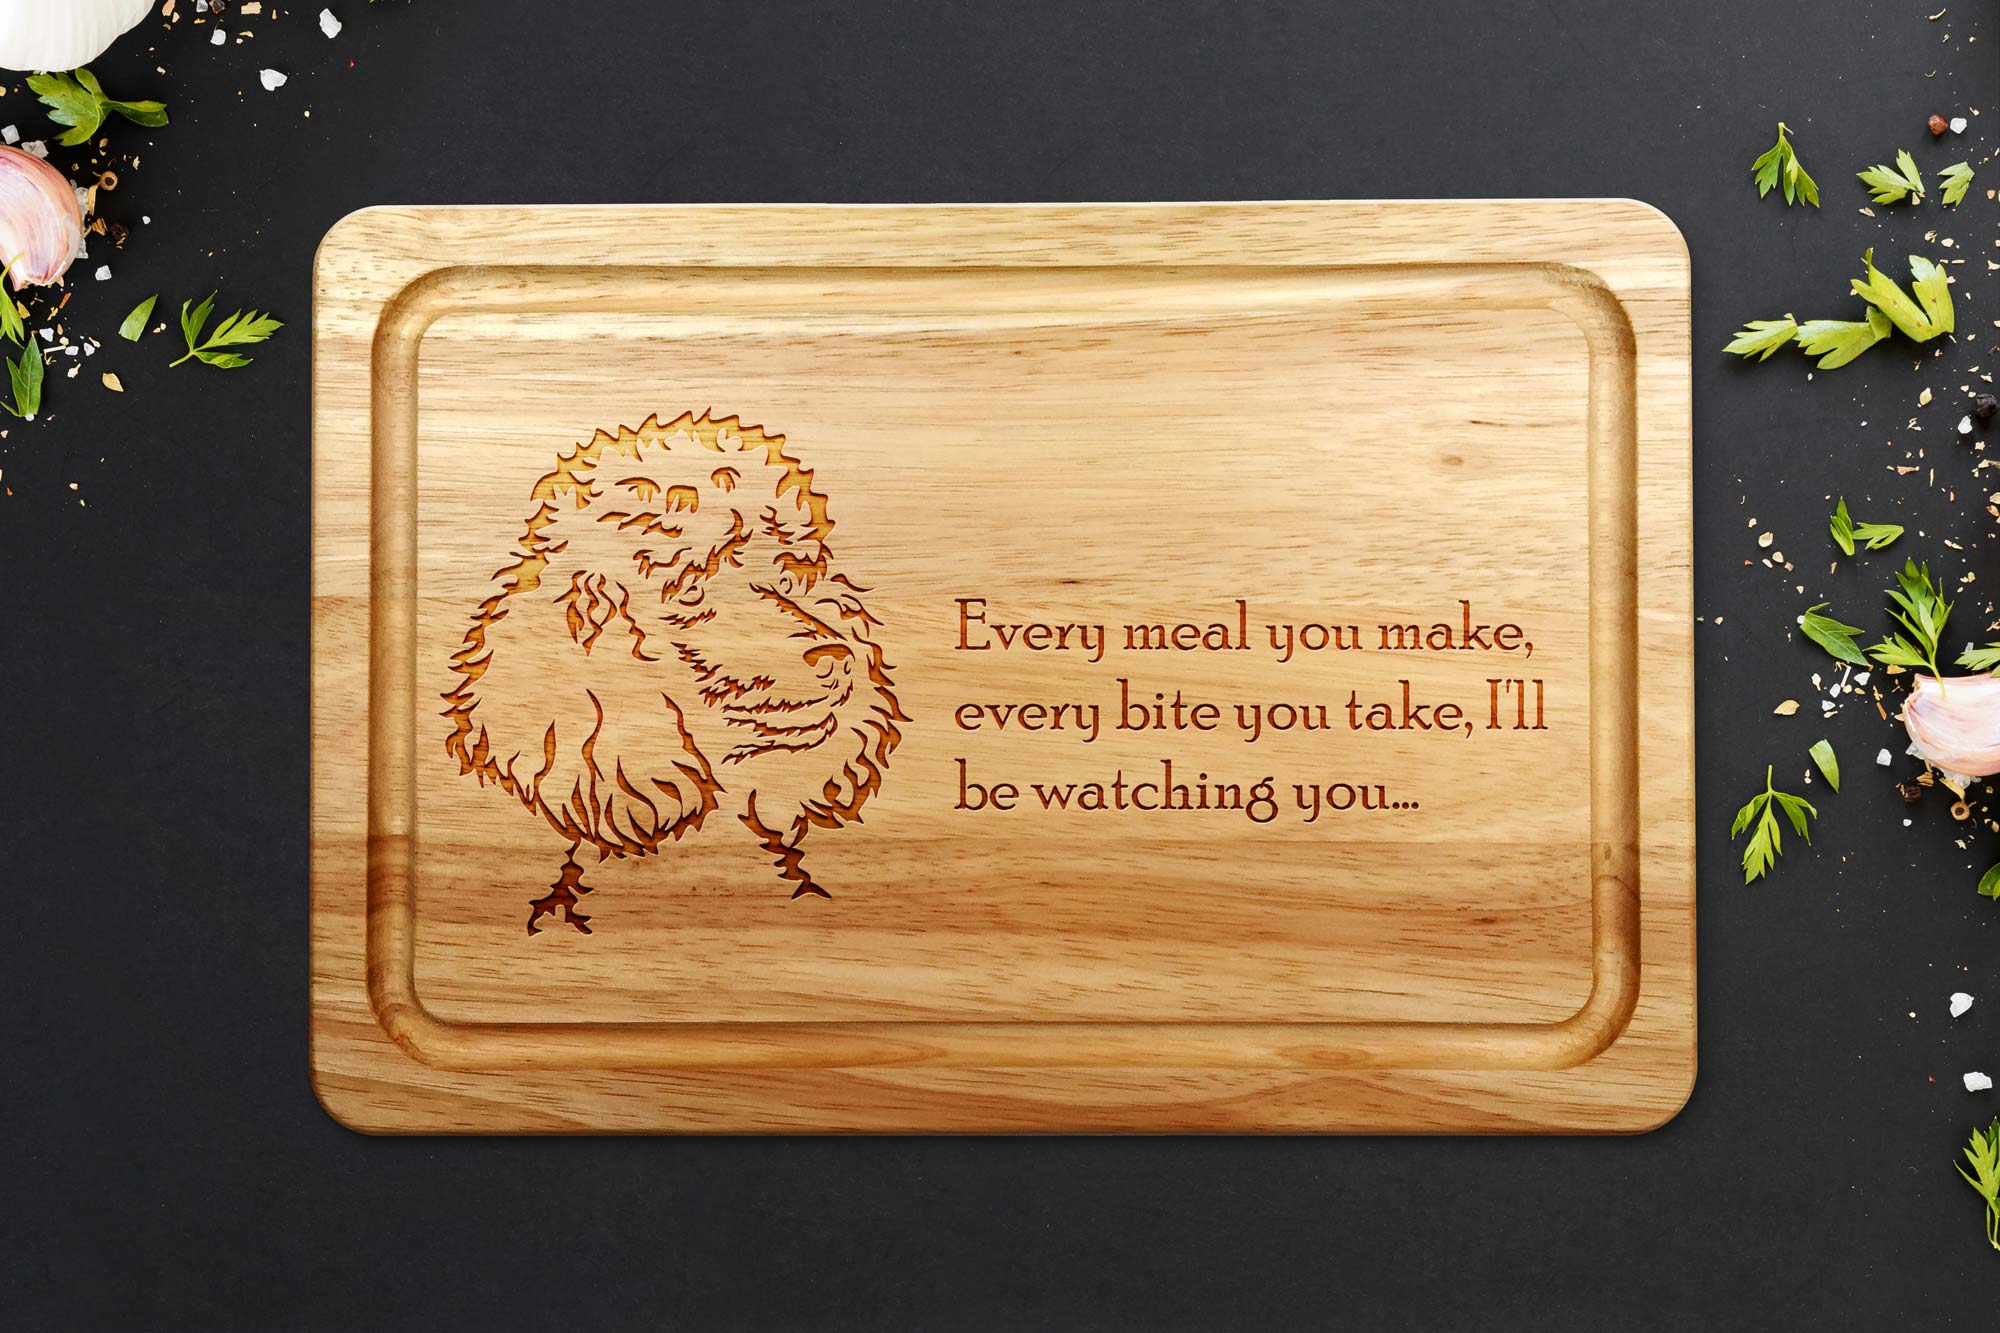 Standard Poodle Wooden Chopping Board